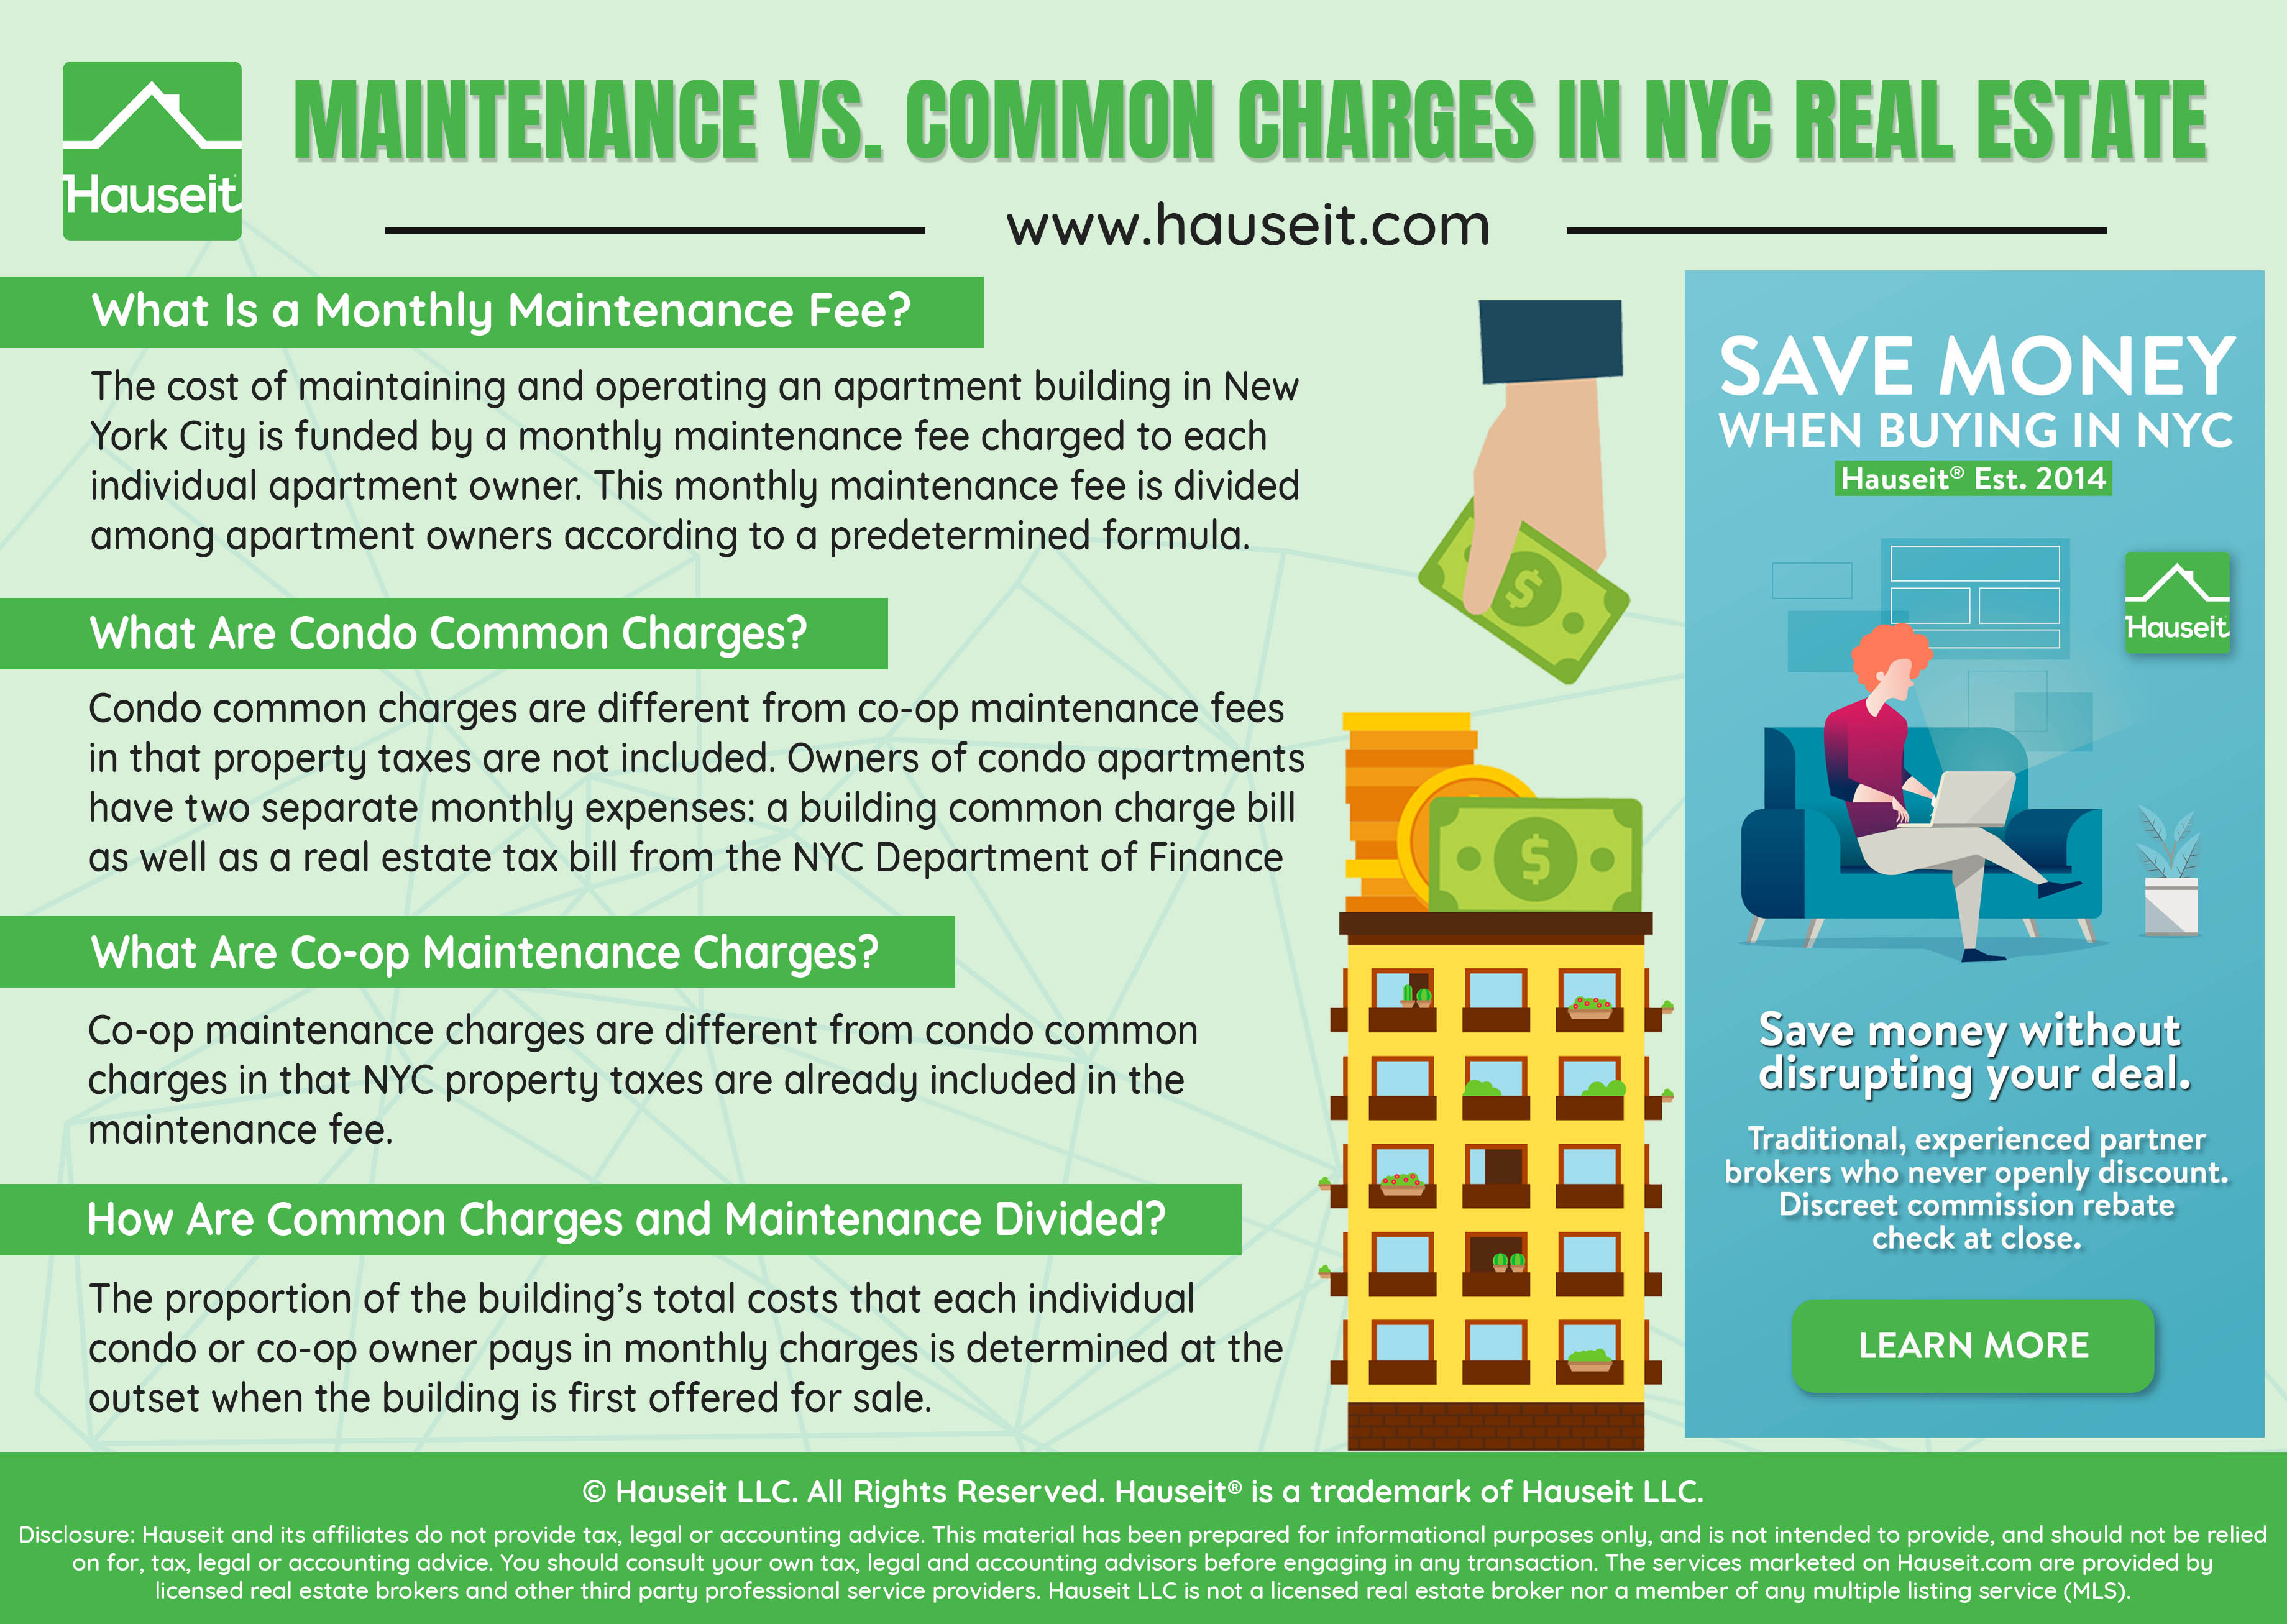 What’s the difference between monthly condo common charges and co-op maintenance fees in NYC?